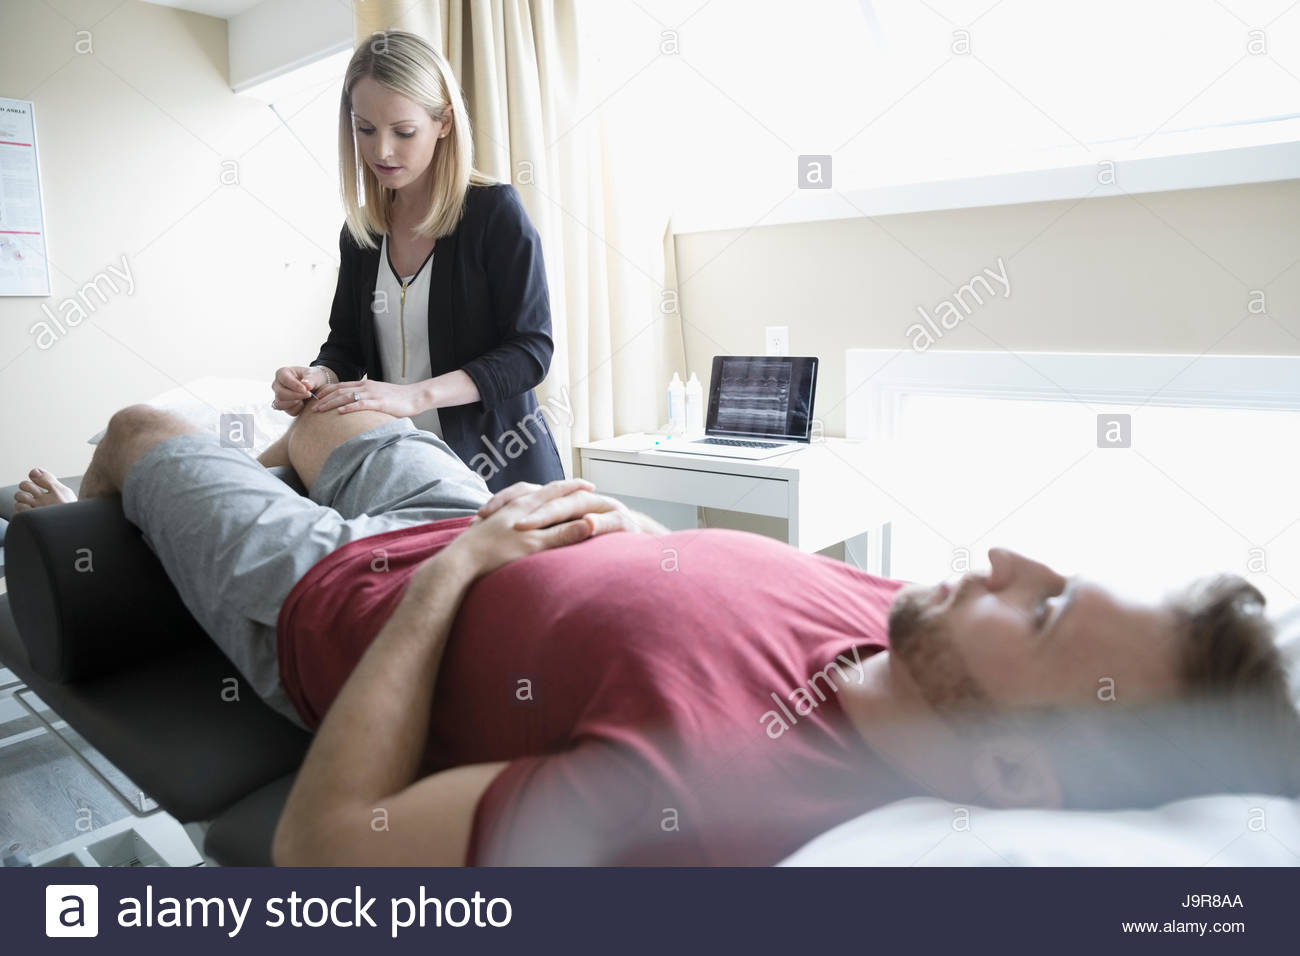 Female acupuncturist inserting needles into knee of man on clinic examination table Stock Photo